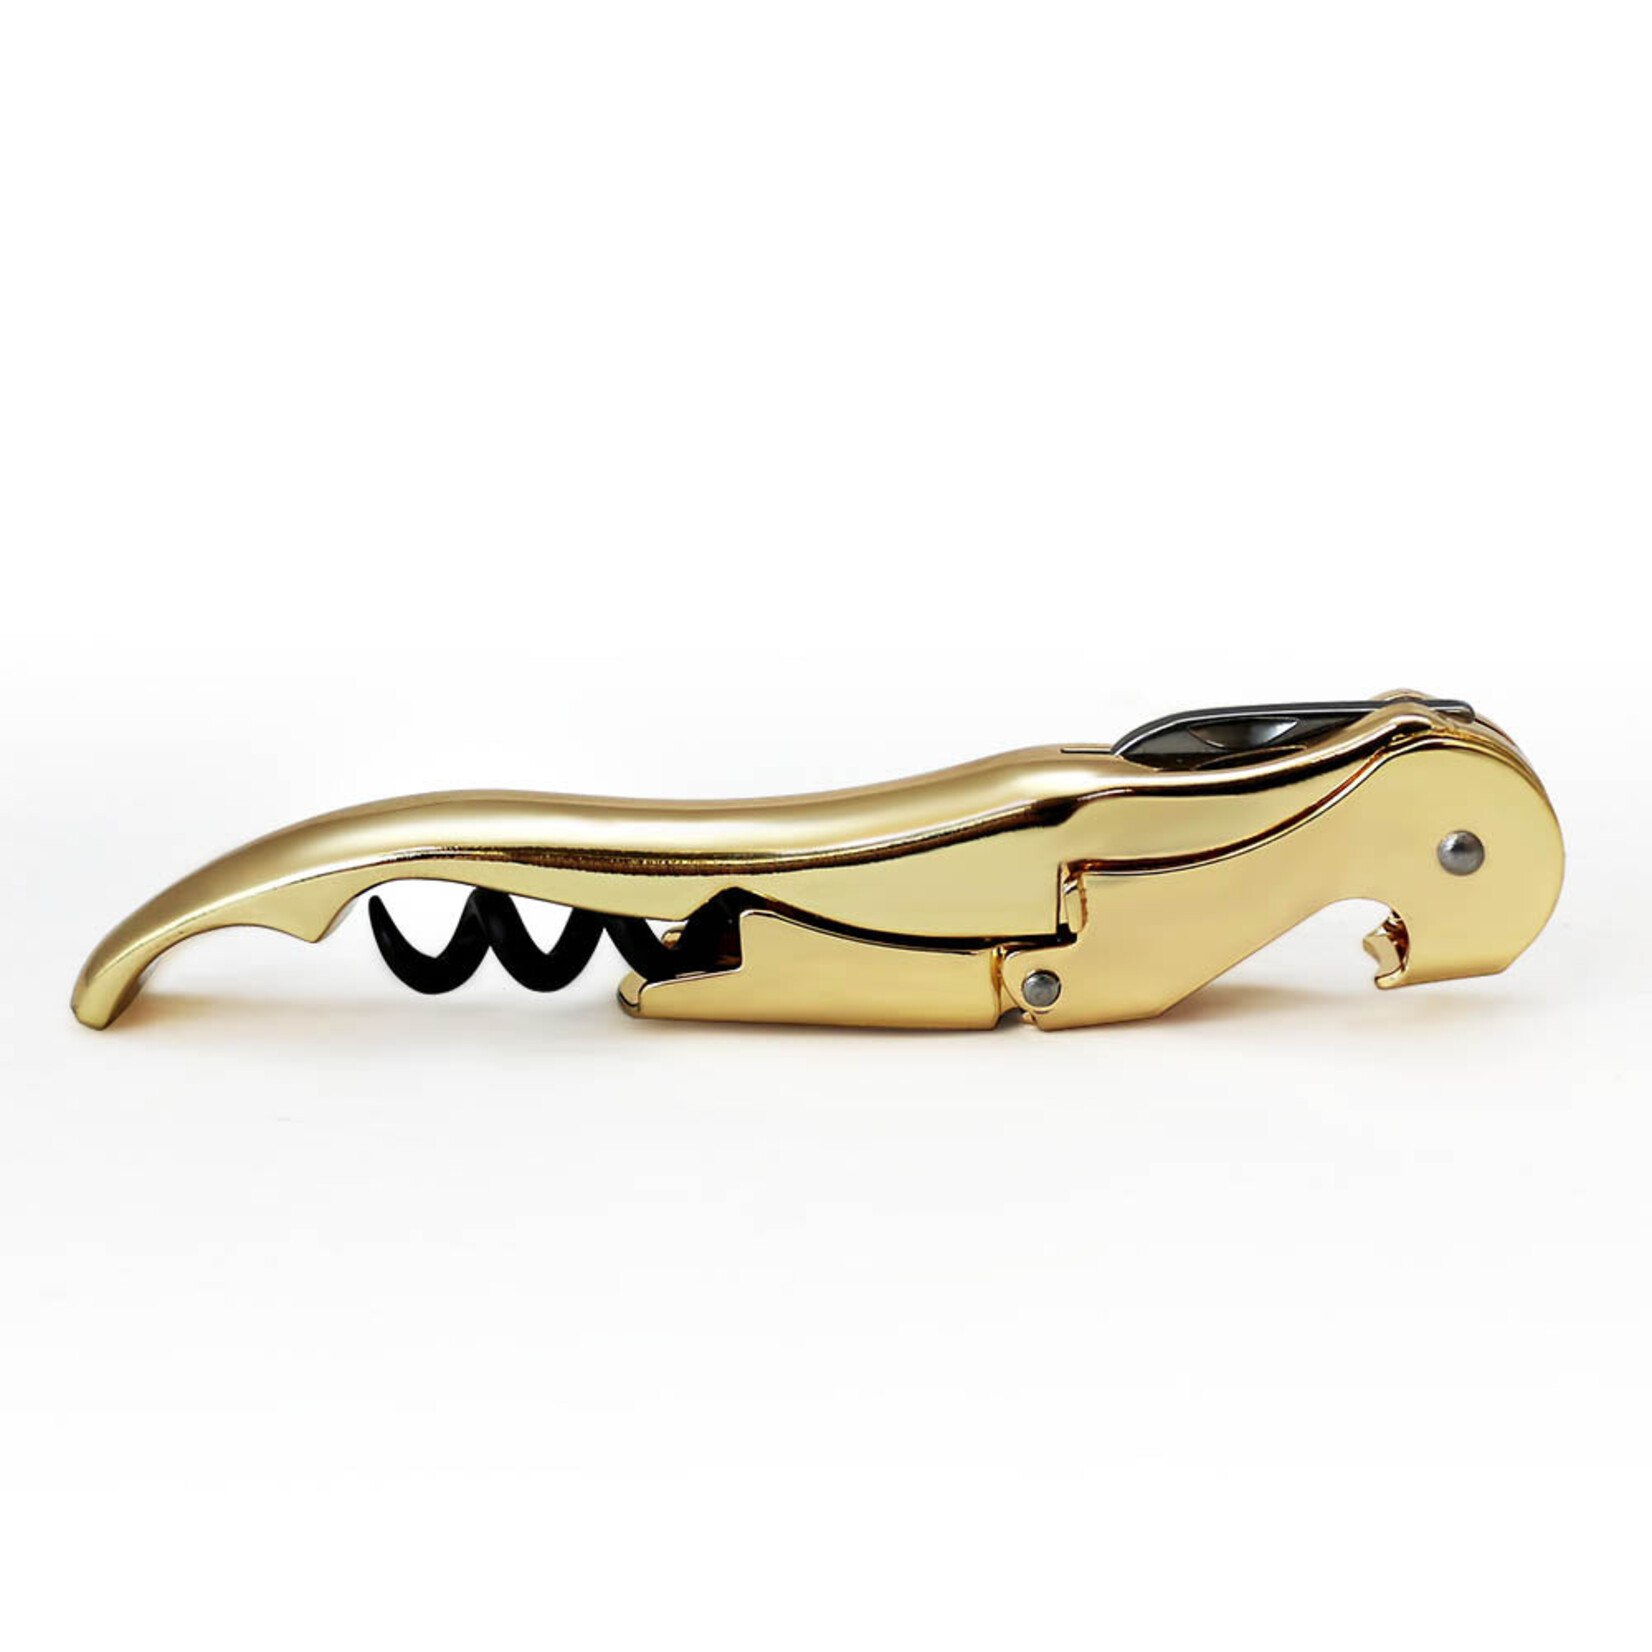 Double-Hinged Corkscrew Gold